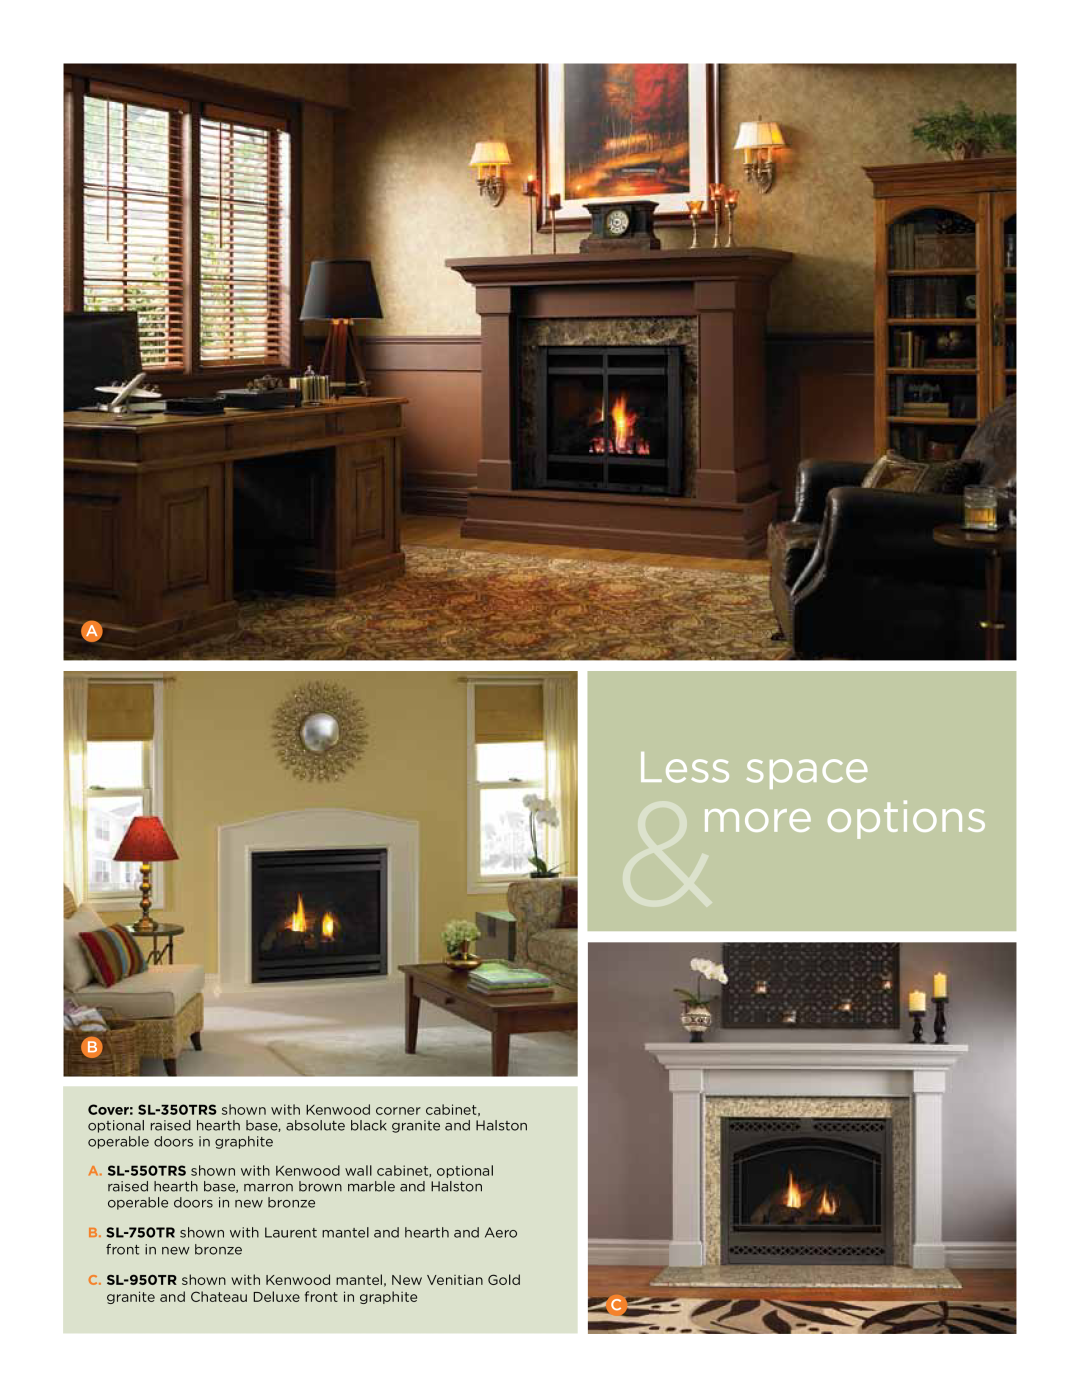 Hearth and Home Technologies SL-350, SL-950, SL-550, SL-750 manual Less space &more options 